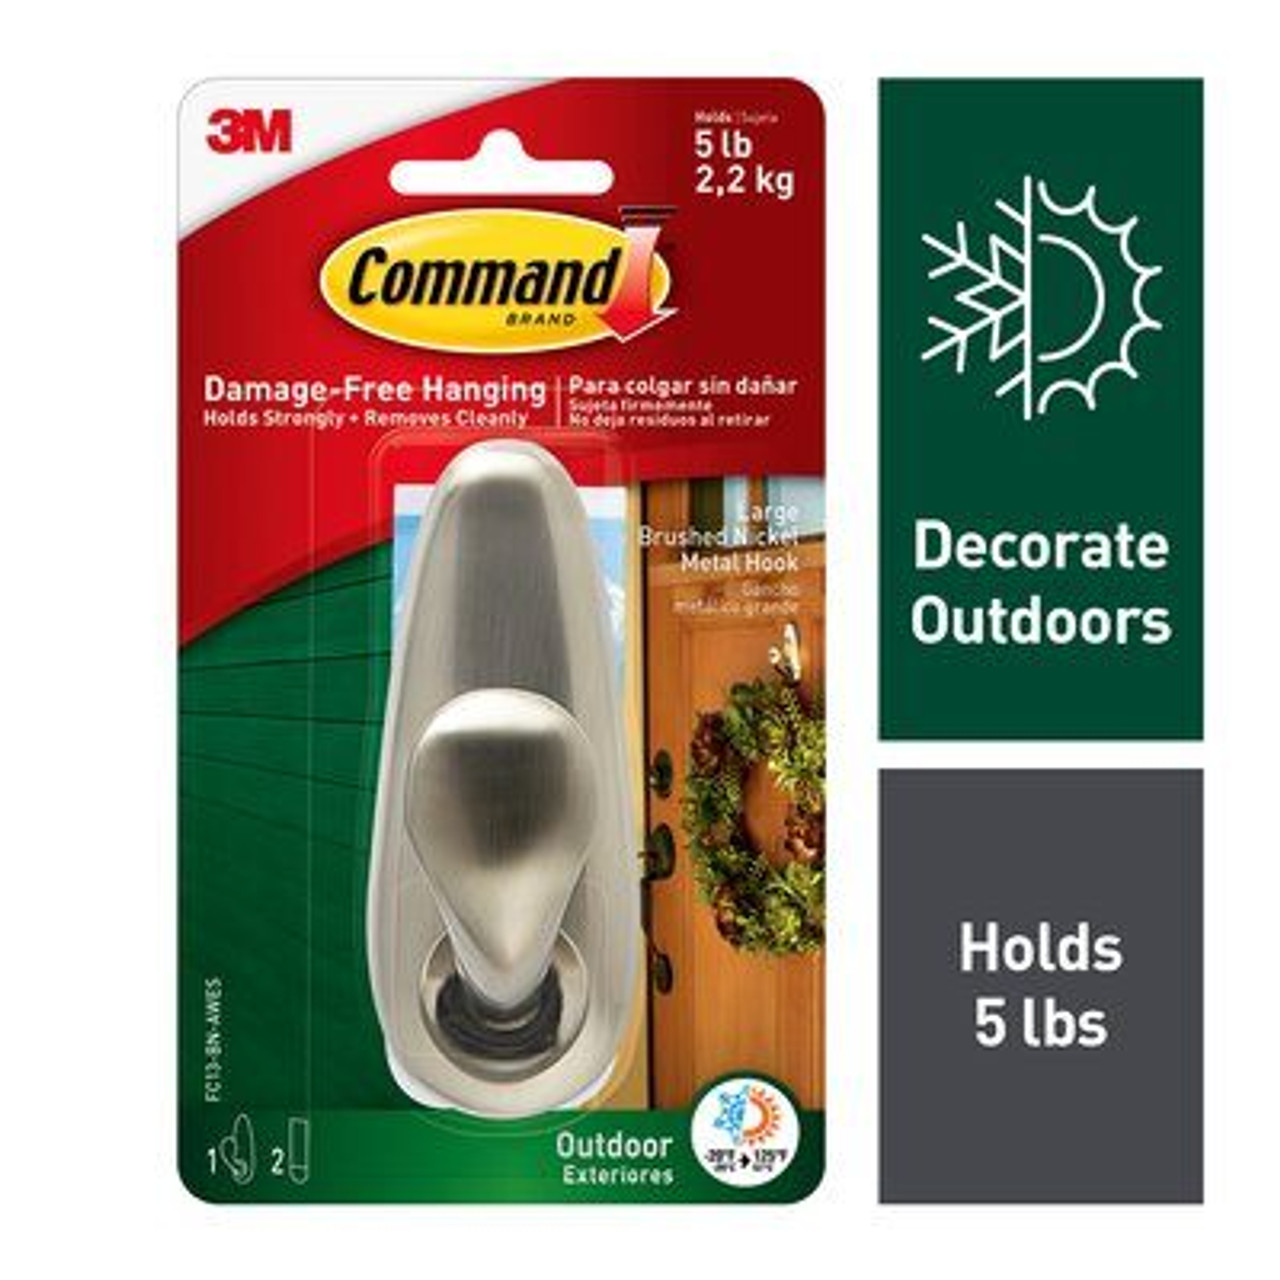 Command™ Outdoor Forever Classic Large Metal Hook with Foam Strips FC13-BN-AW - 1 hook/pack